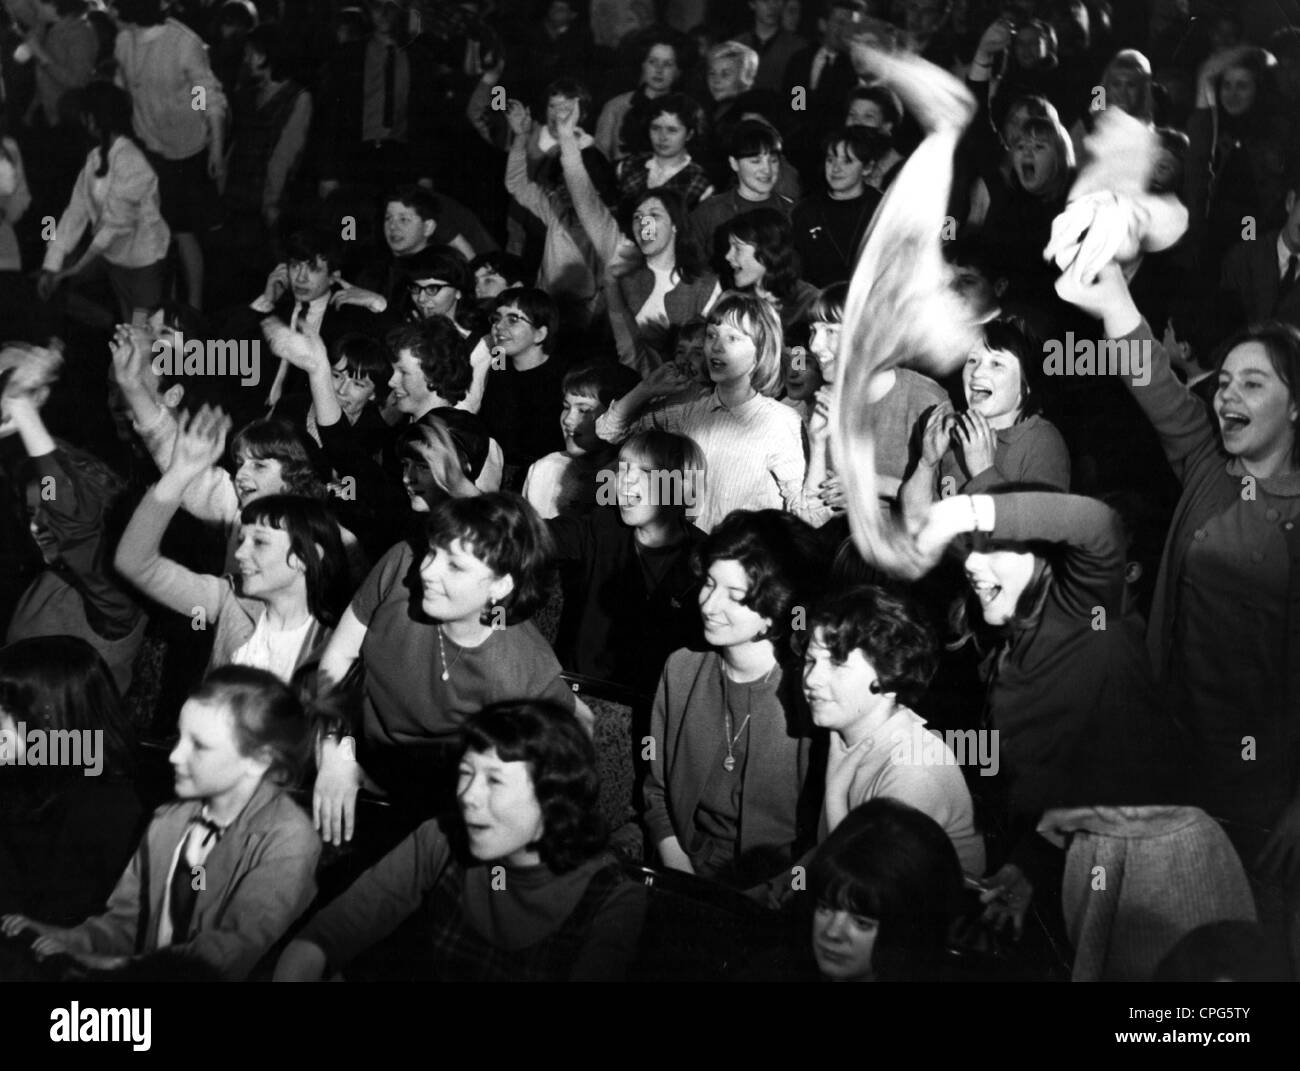 people, youth, Beatles fans in a concert, 1964, Additional-Rights-Clearences-Not Available Stock Photo